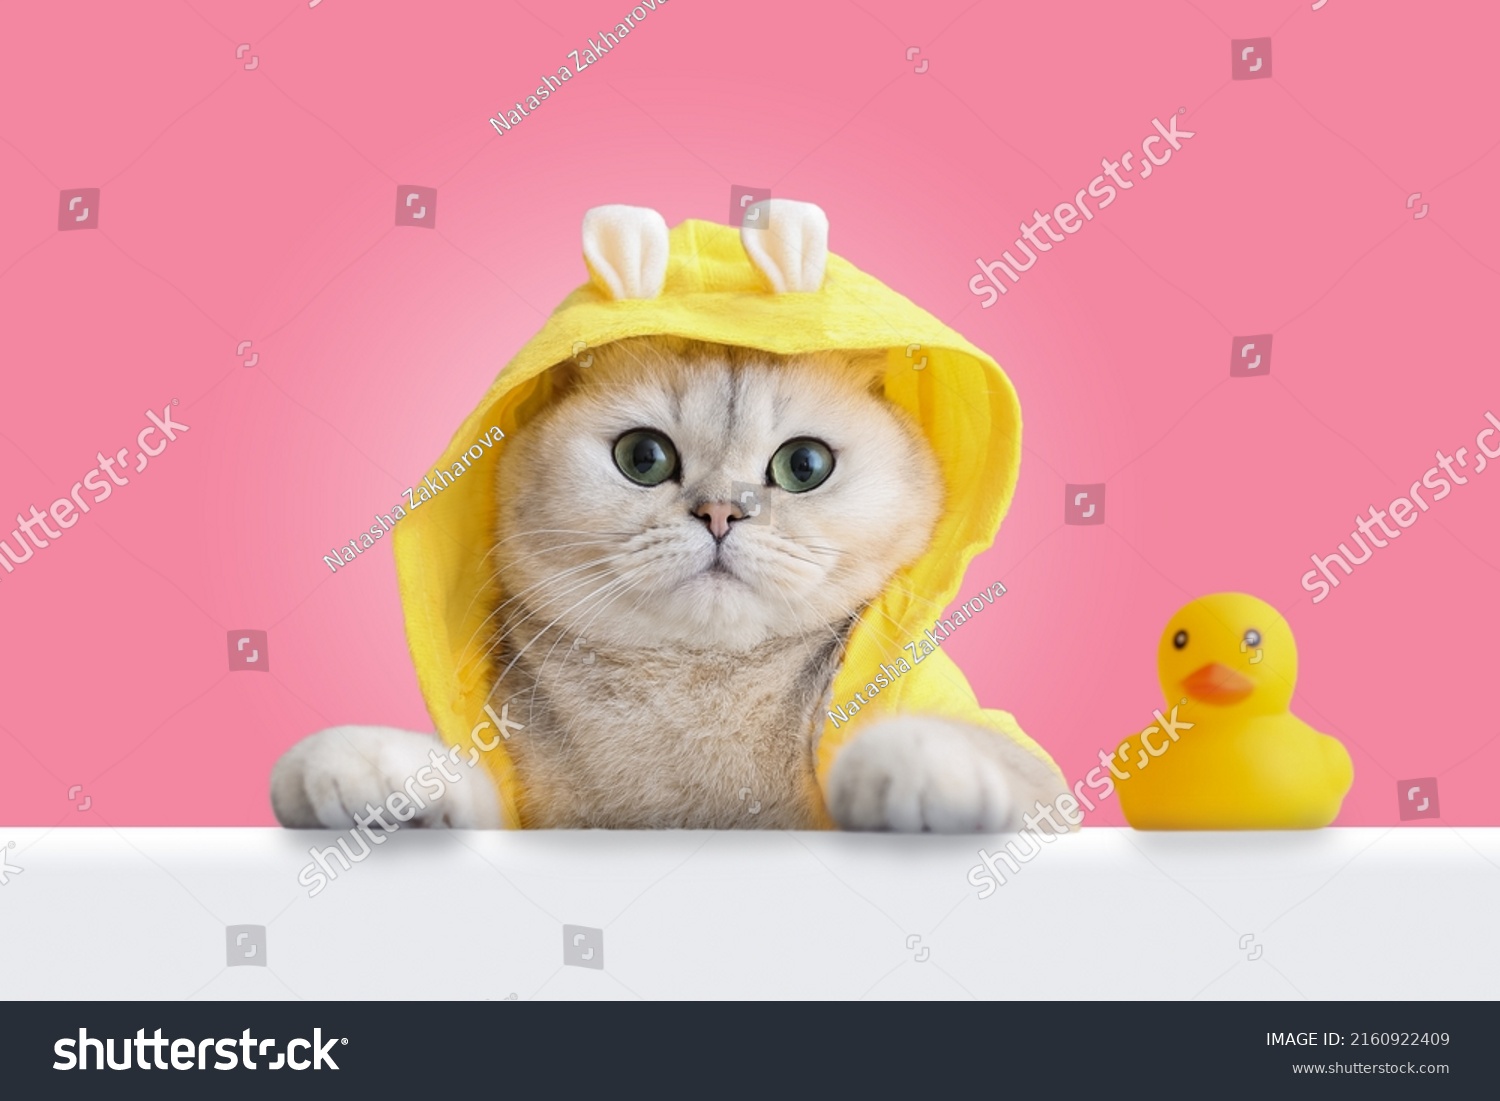 A funny white cat in a yellow coat looks out of a white shell, a yellow rubber duck stands nearby, on a pink background. #2160922409